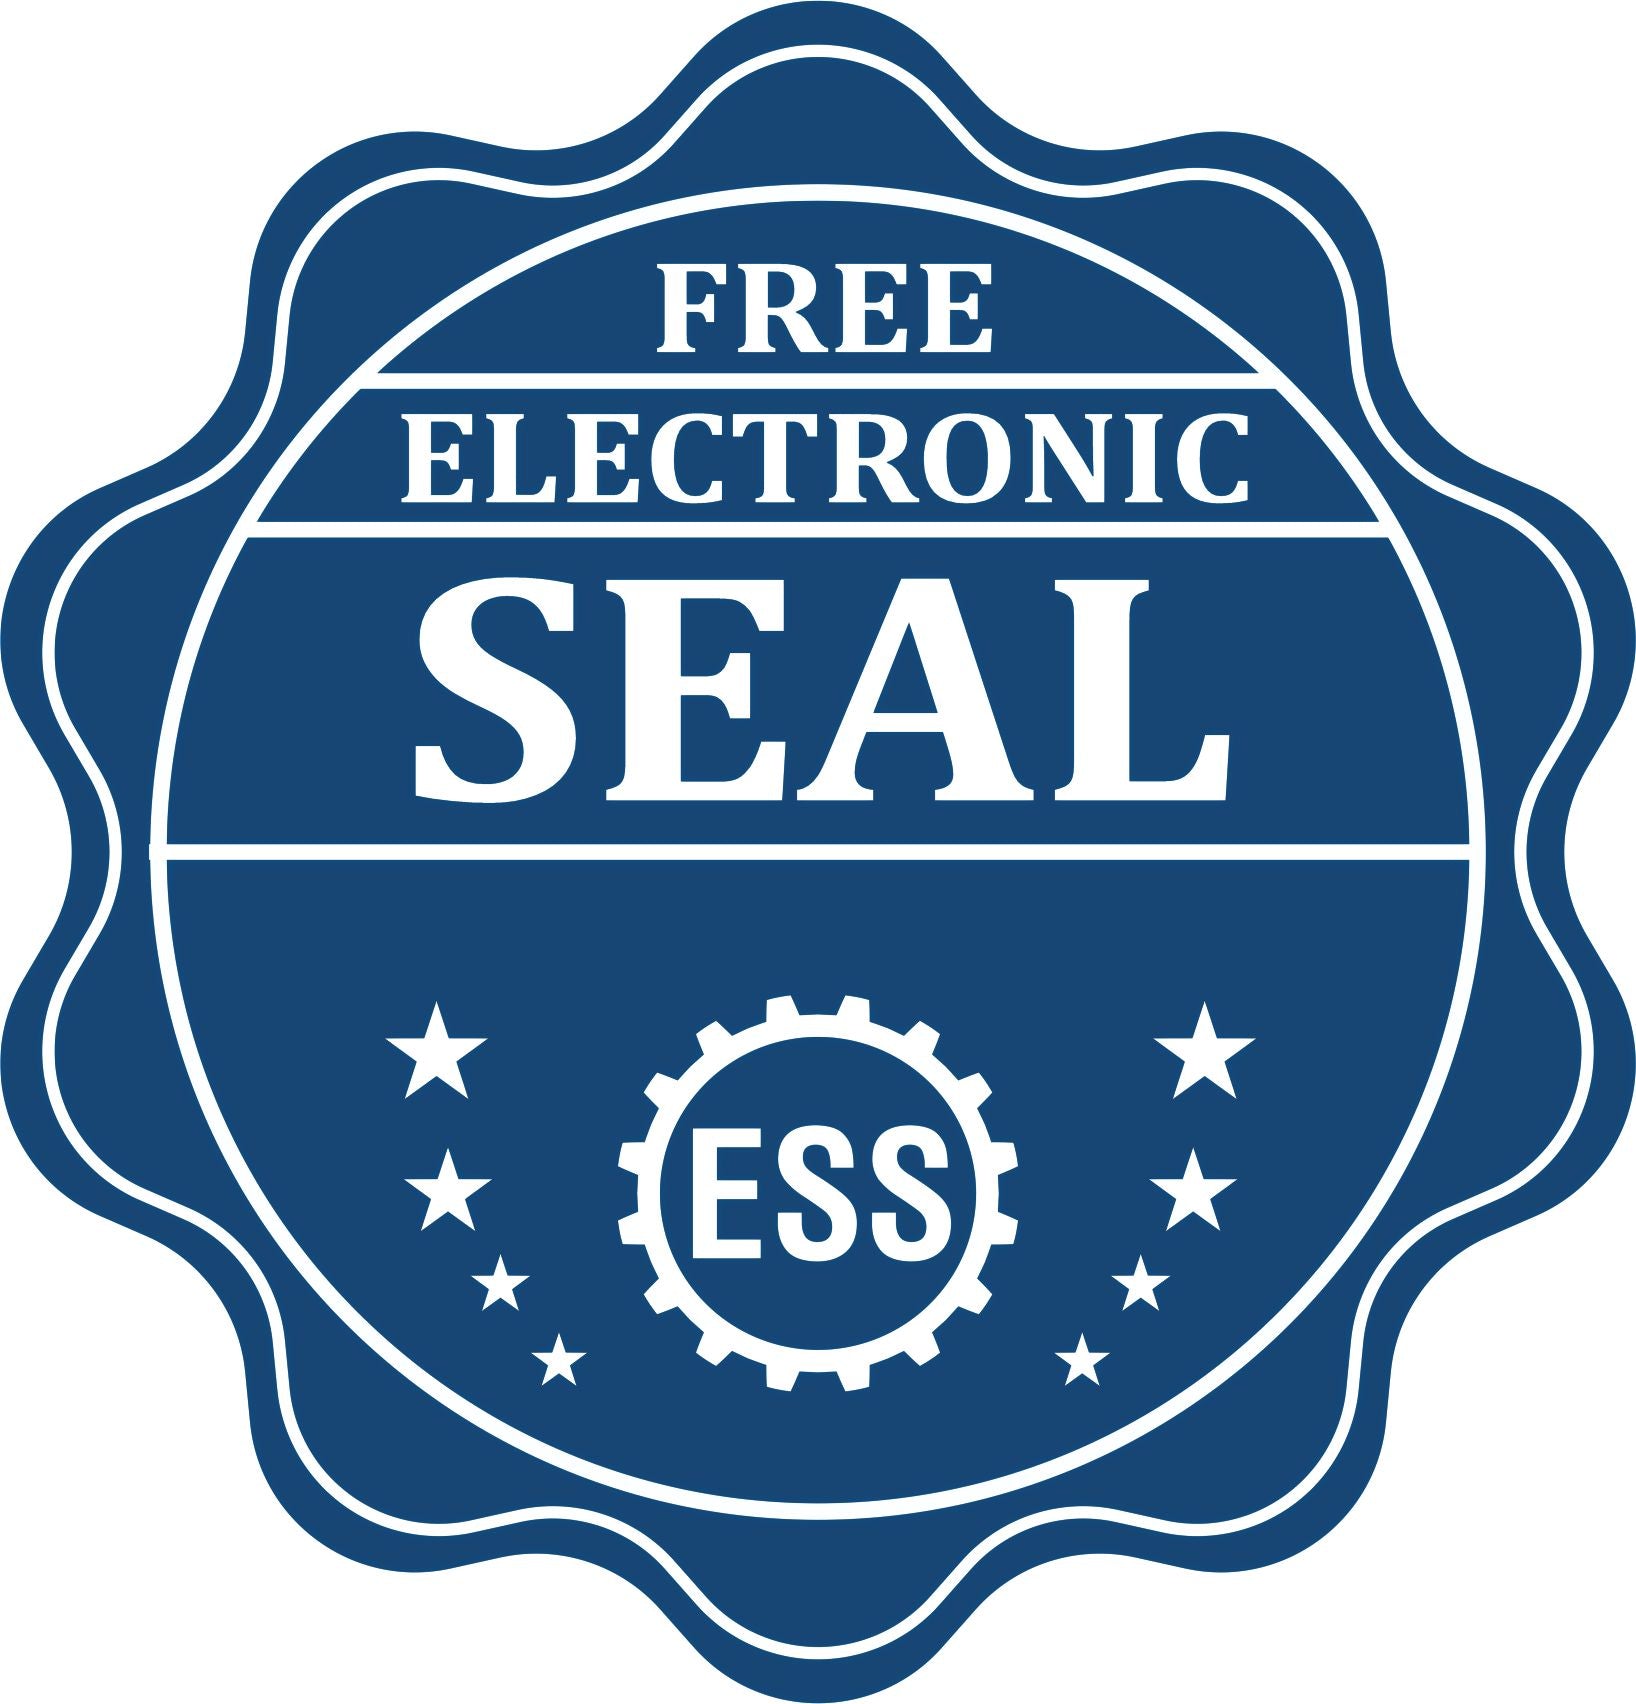 A badge showing a free electronic seal for the Premium MaxLight Pre-Inked Nevada Engineering Stamp with stars and the ESS gear on the emblem.